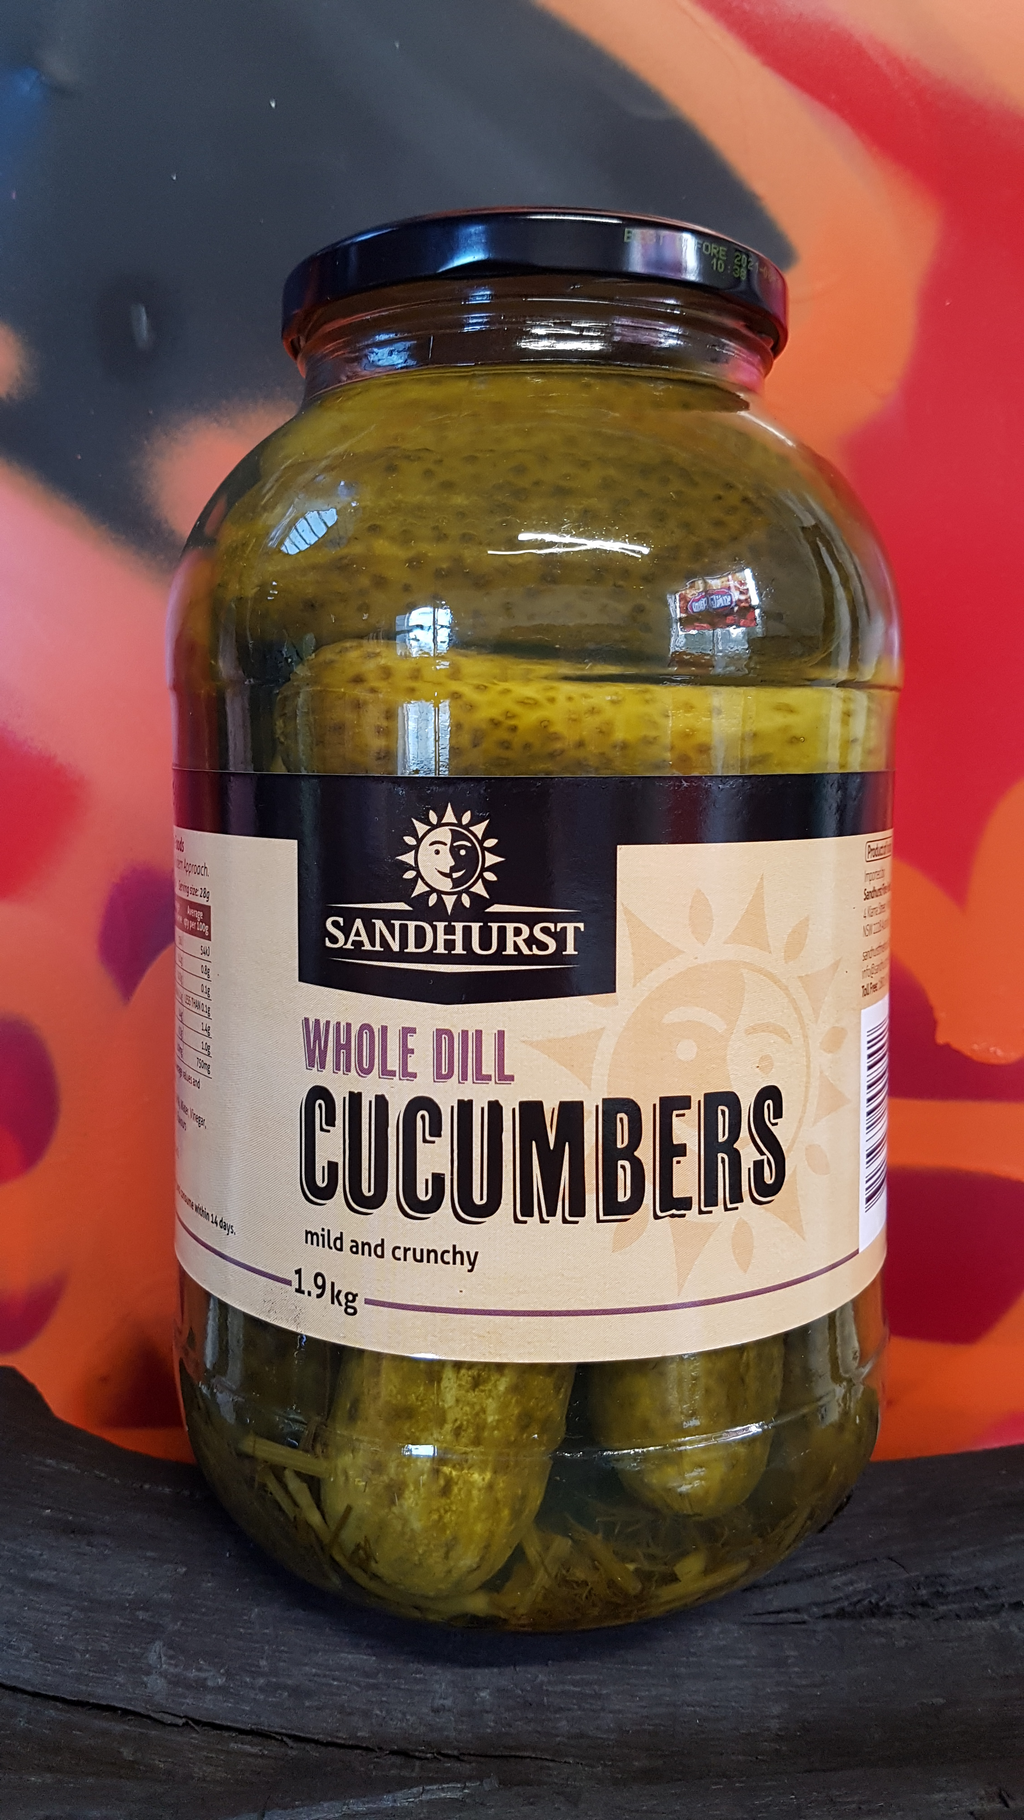 Whole Dill Pickled Cucumber, no sugar added 1.9kg